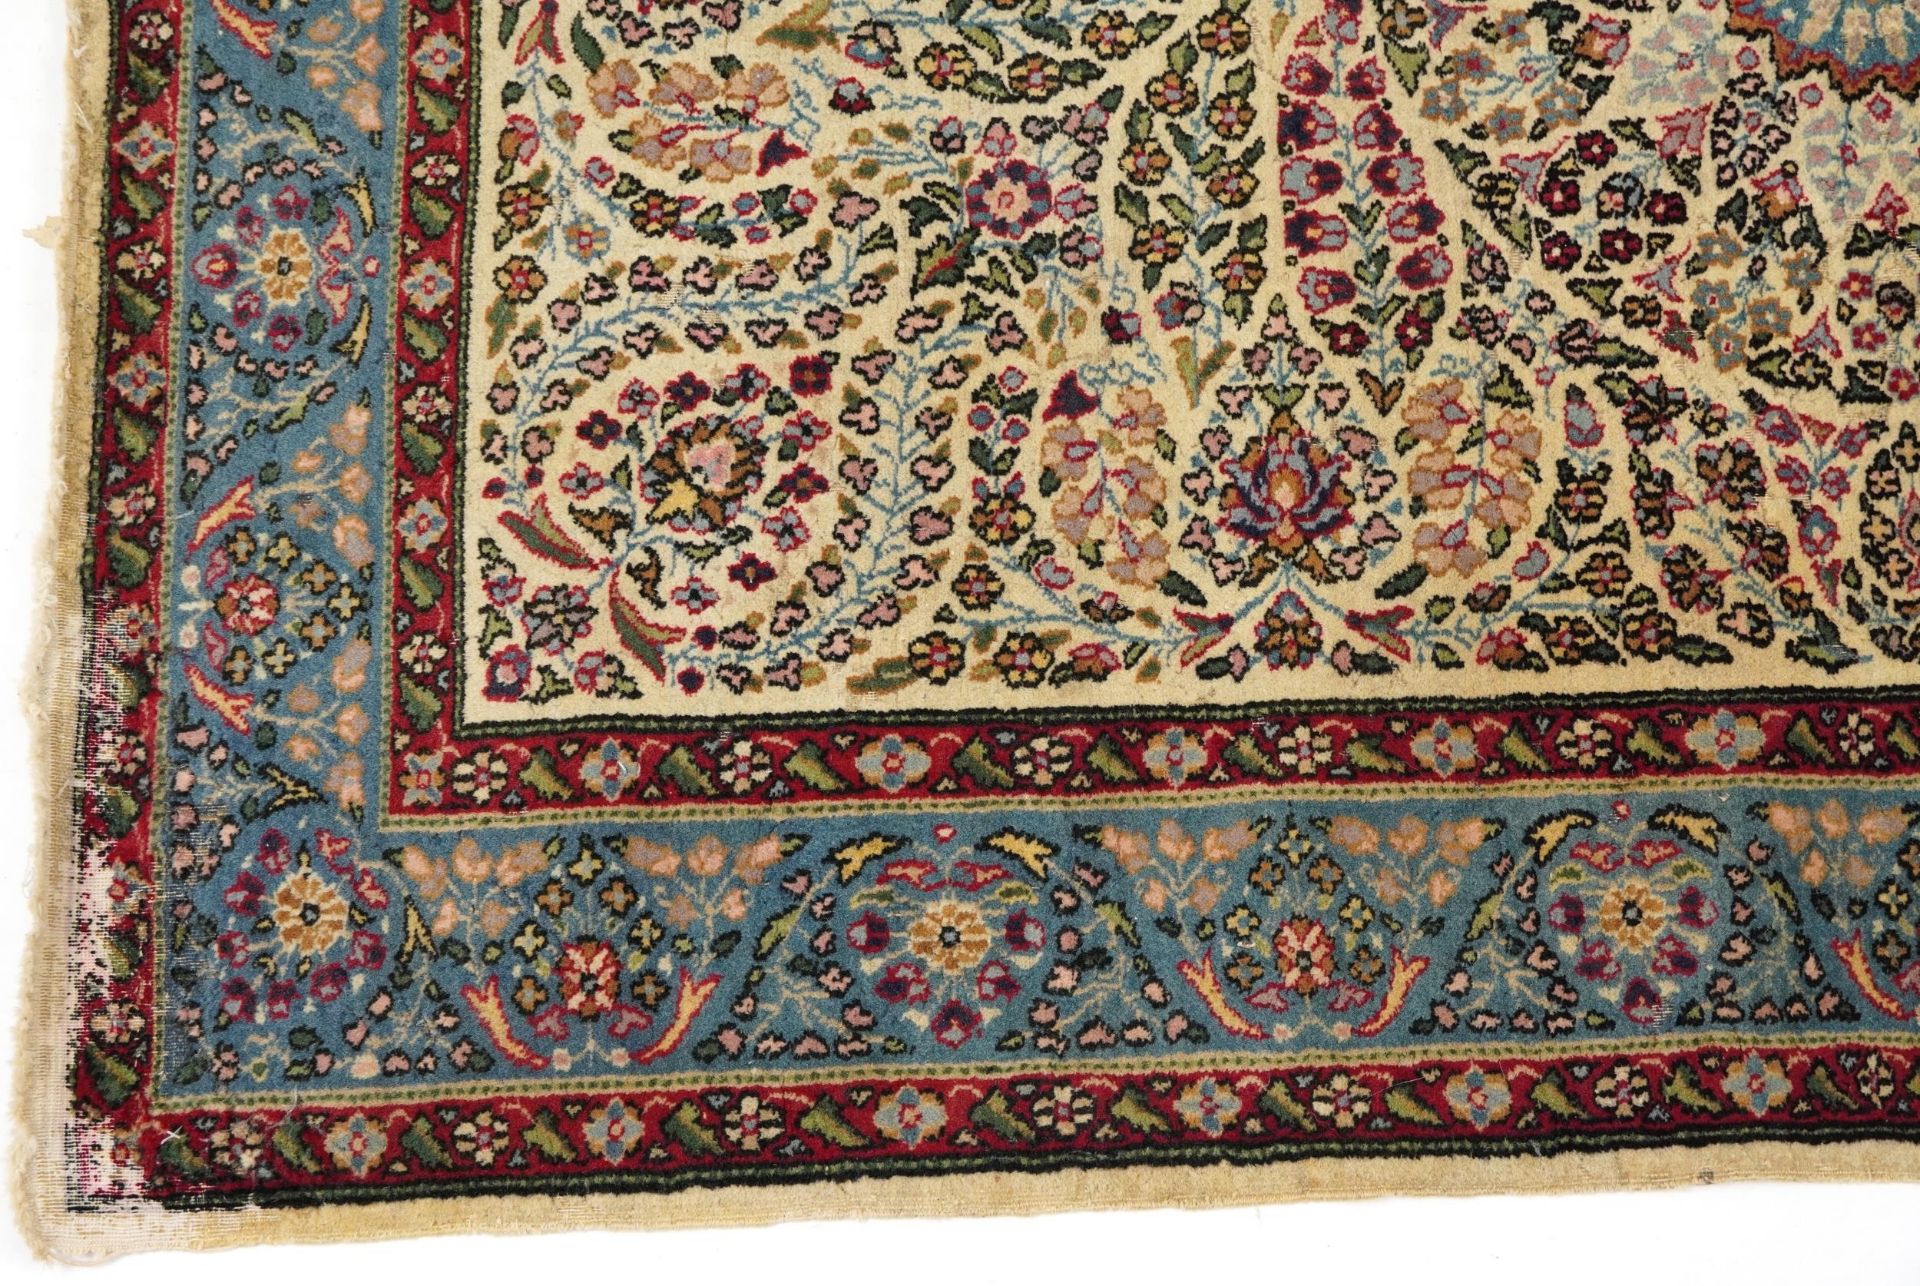 Rectangular Persian cream and blue ground rug having an all over floral design, 182cm x 125cm - Image 4 of 6